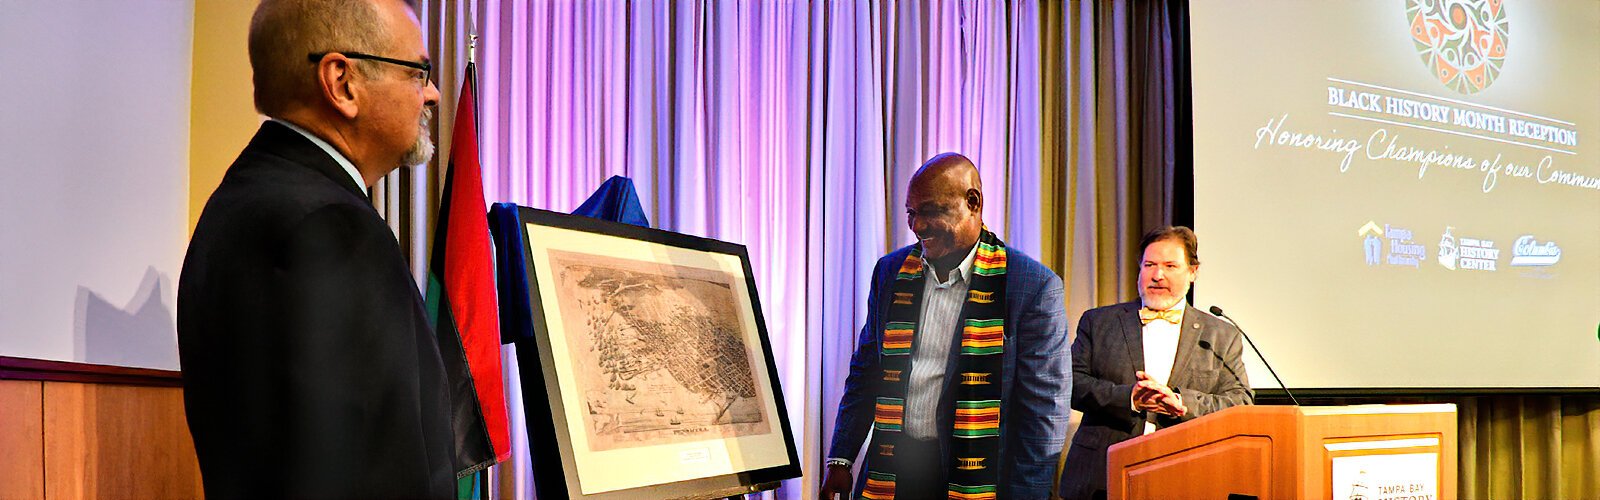 TBHC President and CEO C. J. Roberts and TBHC Historian and Touchton Map Library Director Rodney Kite-Powell present Derrick Brooks with a framed historical map of his native Pensacola.